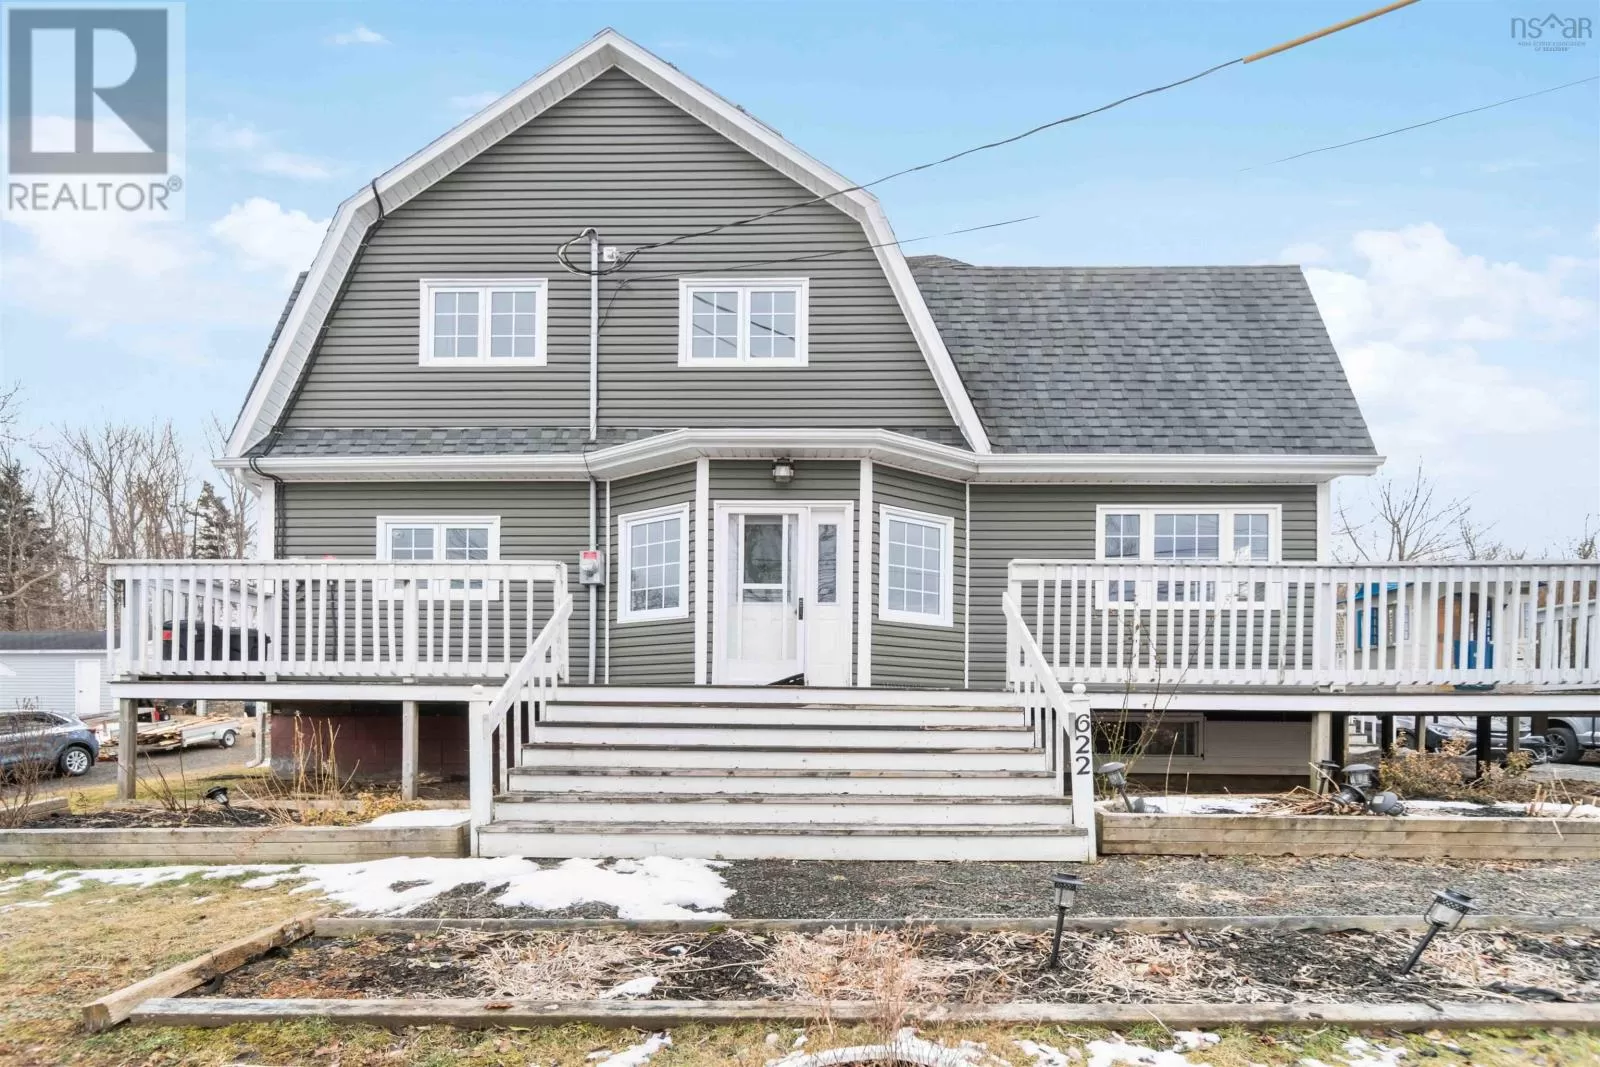 House for rent: 622 Highway 1, Smiths Cove, Nova Scotia B0S 1S0